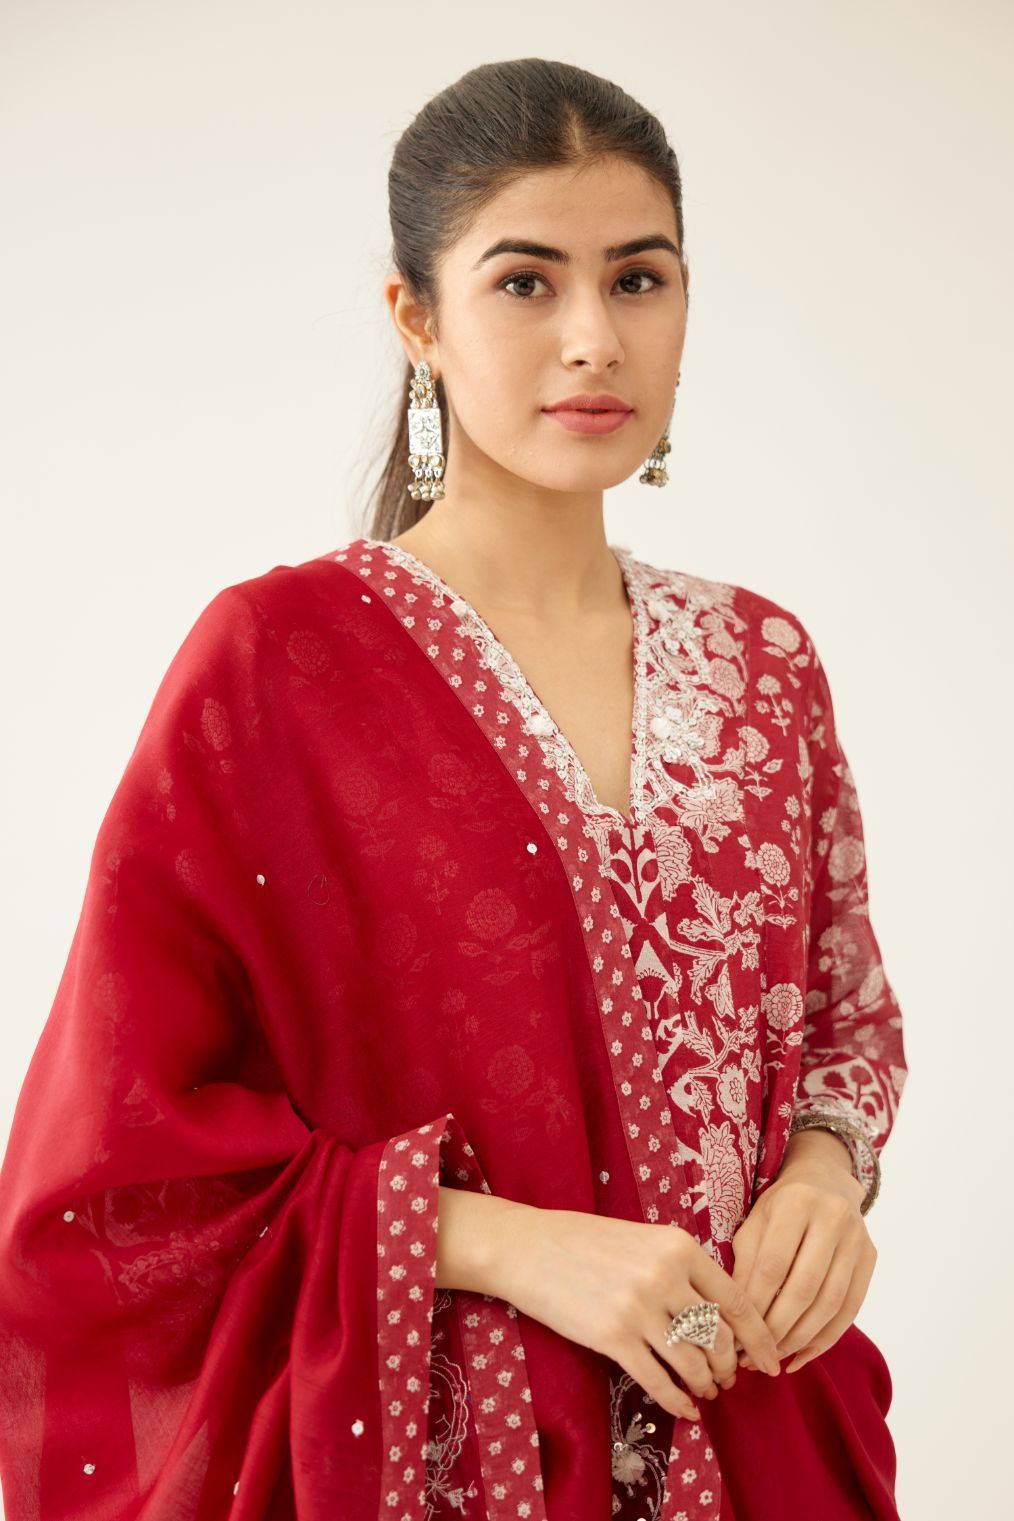 Red hand block printed kurta dress set with a V neck, detailed with sequin, tassels and bead work.